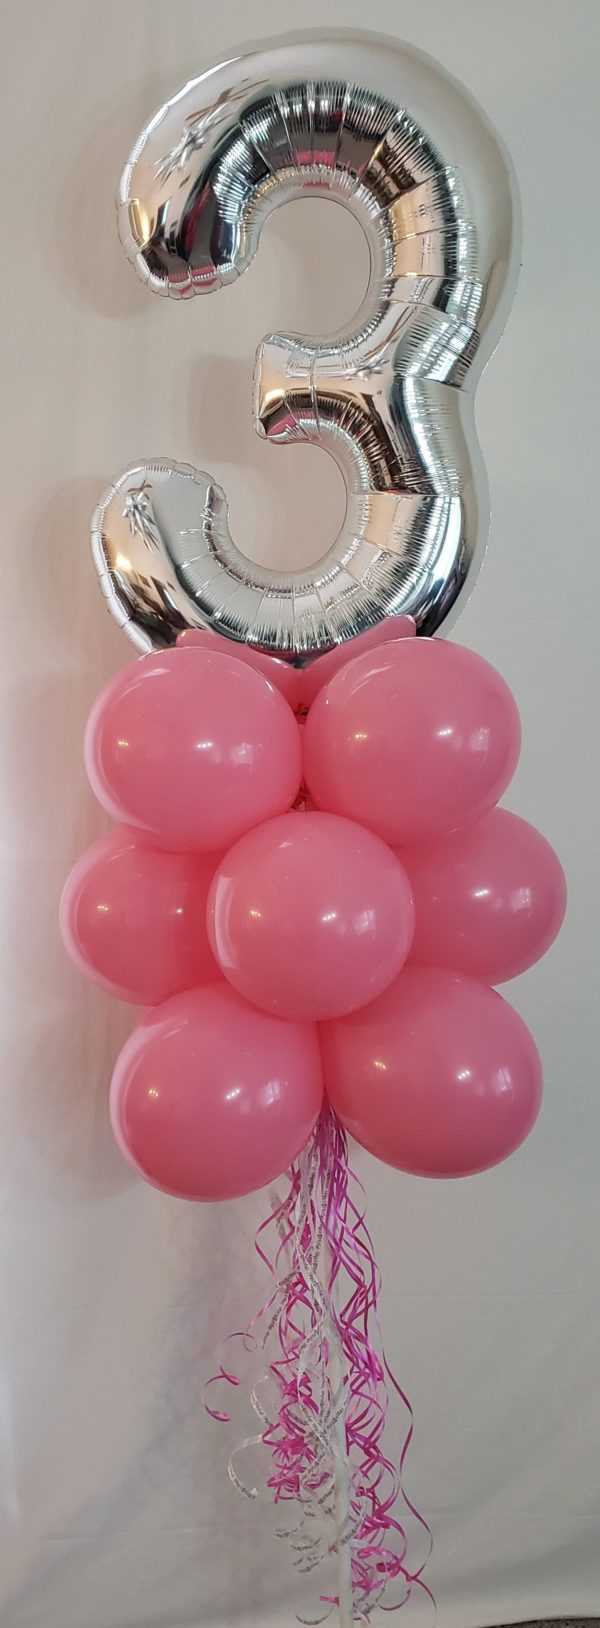 Do you need a B-Day numbered yard pole to help celebrate that special day? Let us make one of these popular yard poles in their favorite colors & of course their B-Day number on top.